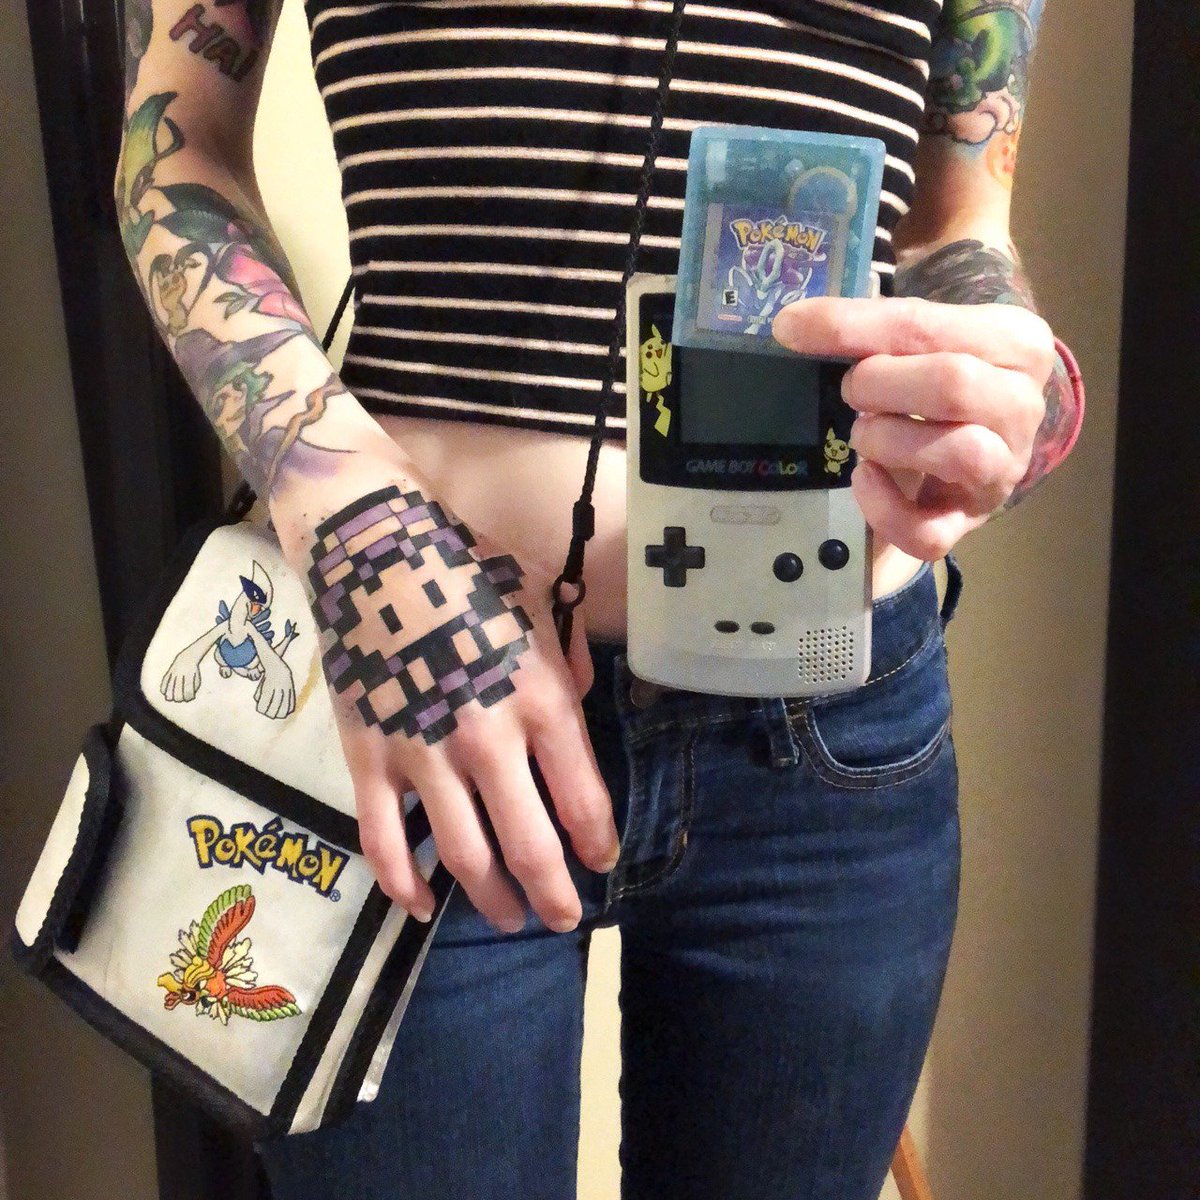 Who else had this exact Gameboy Color? #pixelart #pixelartist  #pixelartsociety #aseprite #gameboycolor #pixeltattoo #pixeltattoos  #pixel... | Instagram